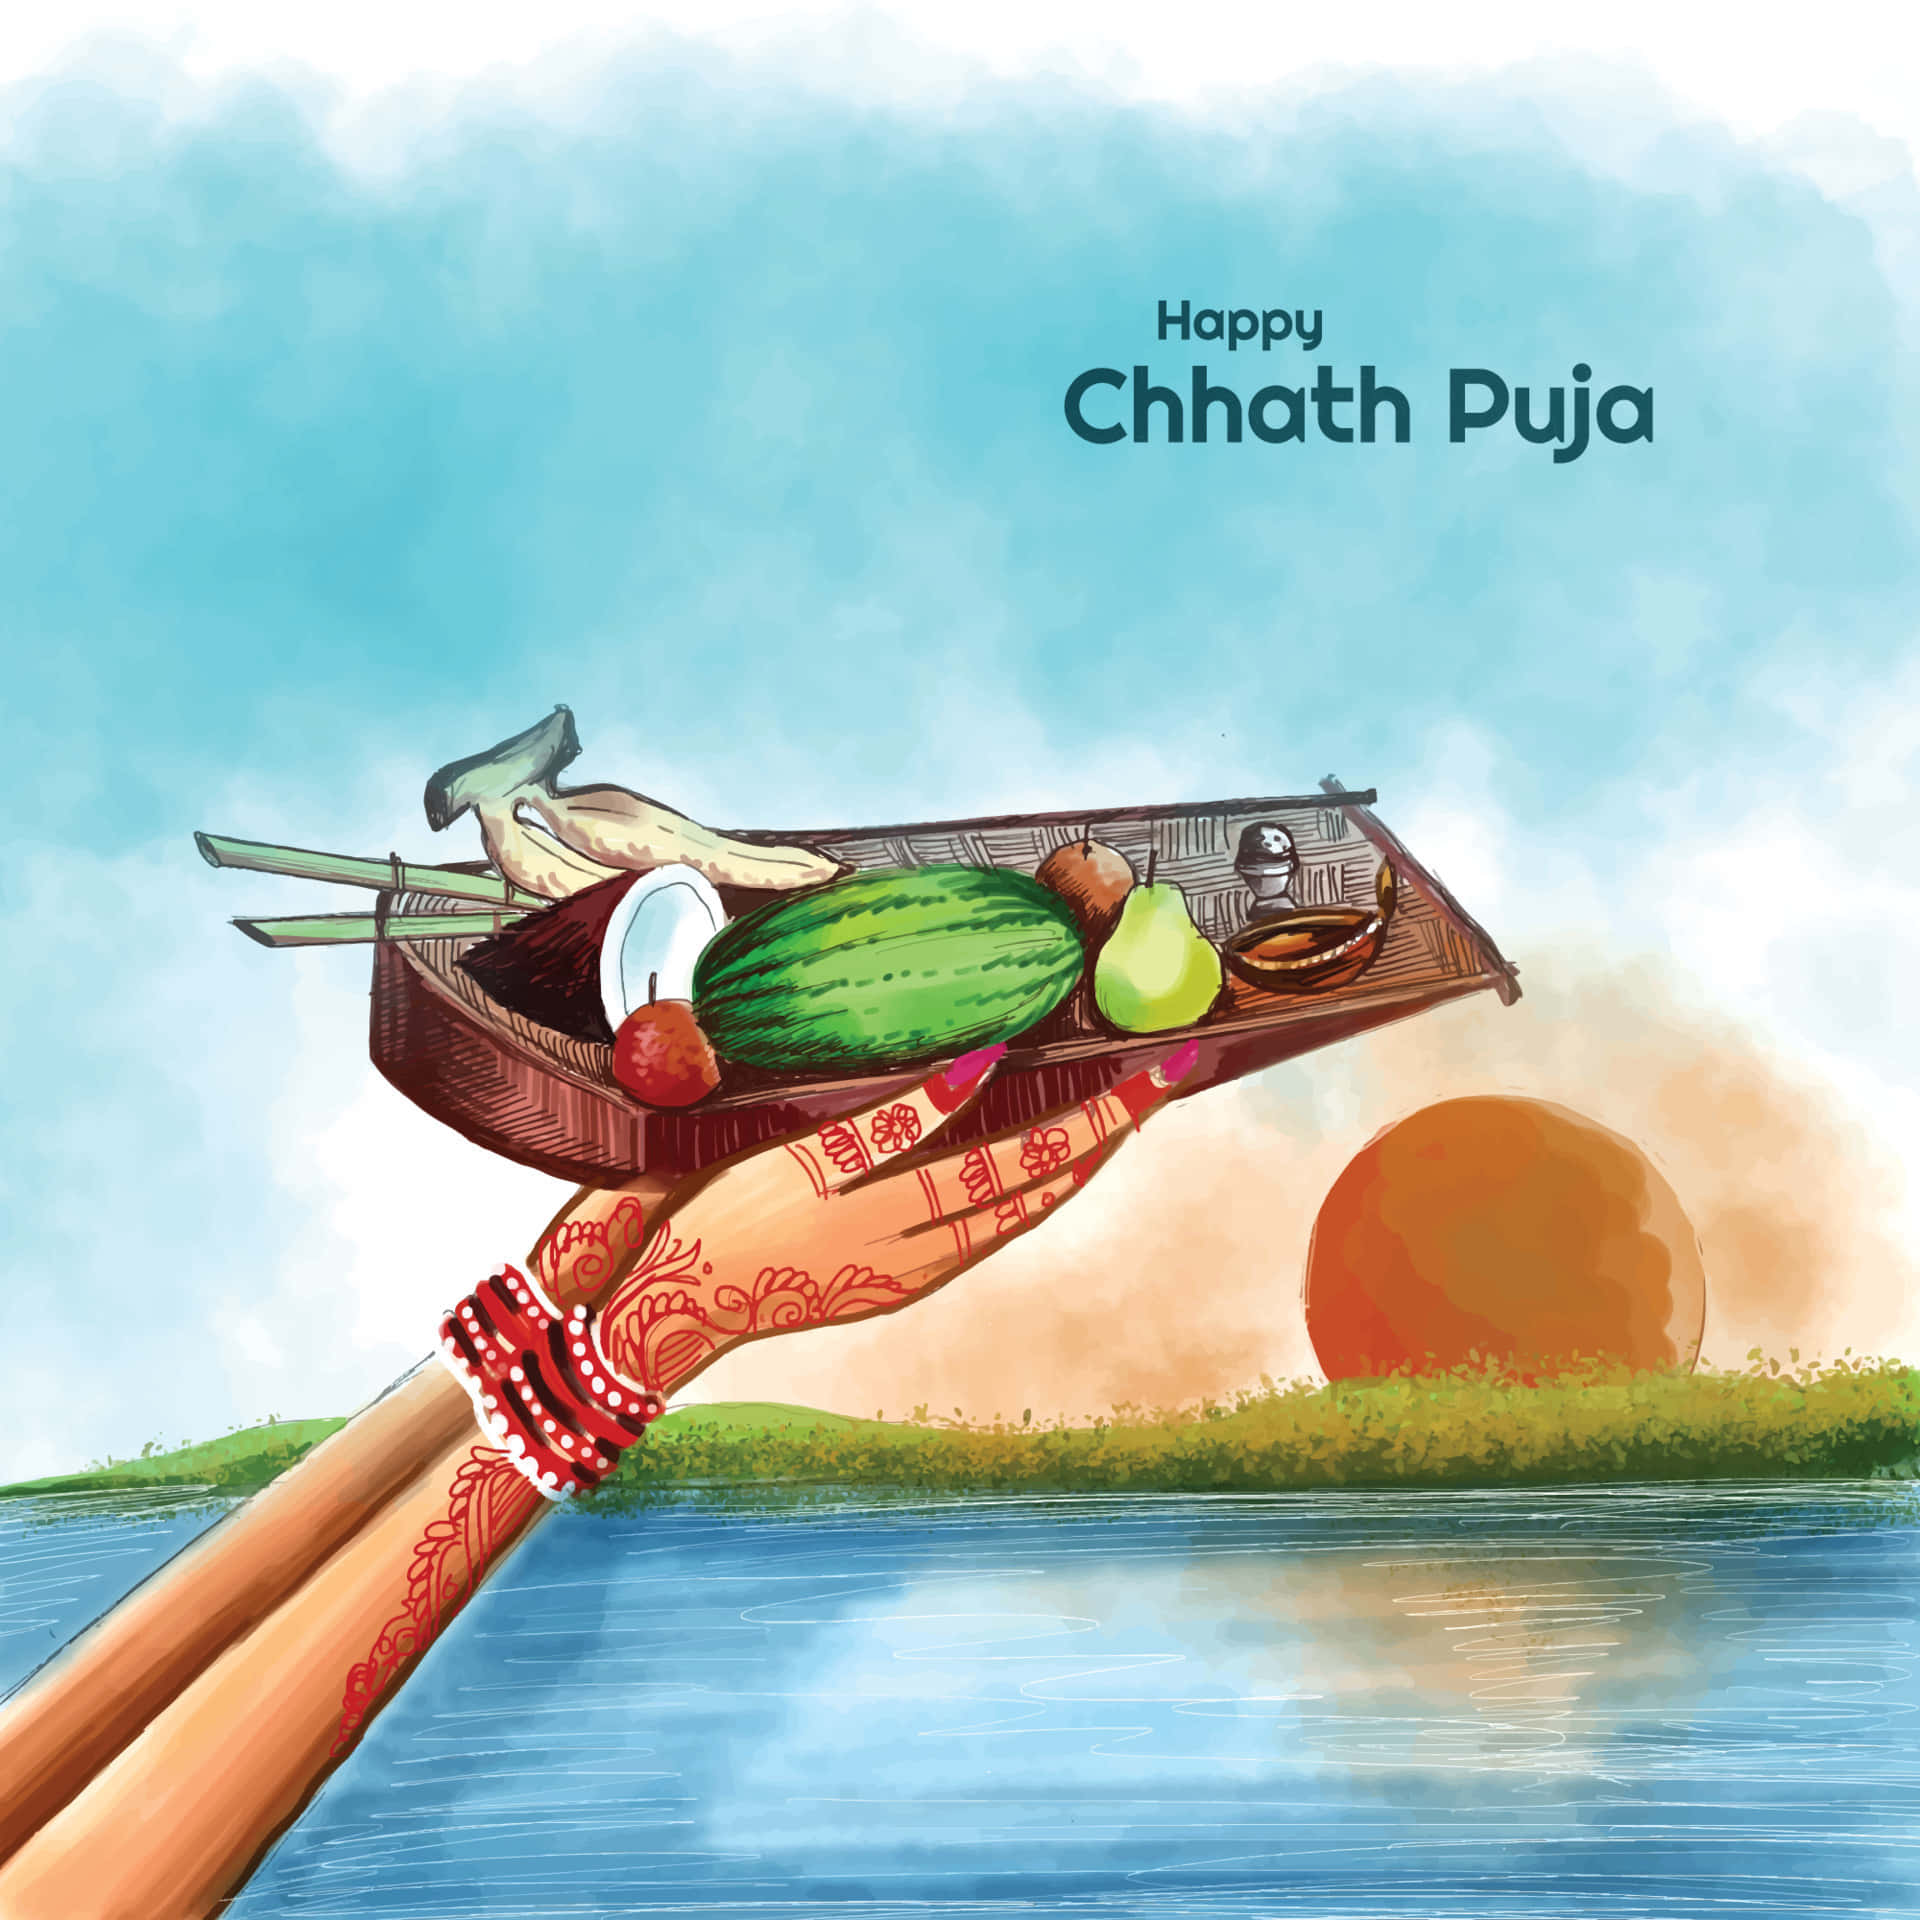 Chhath Puje Images :: Photos, videos, logos, illustrations and branding ::  Behance